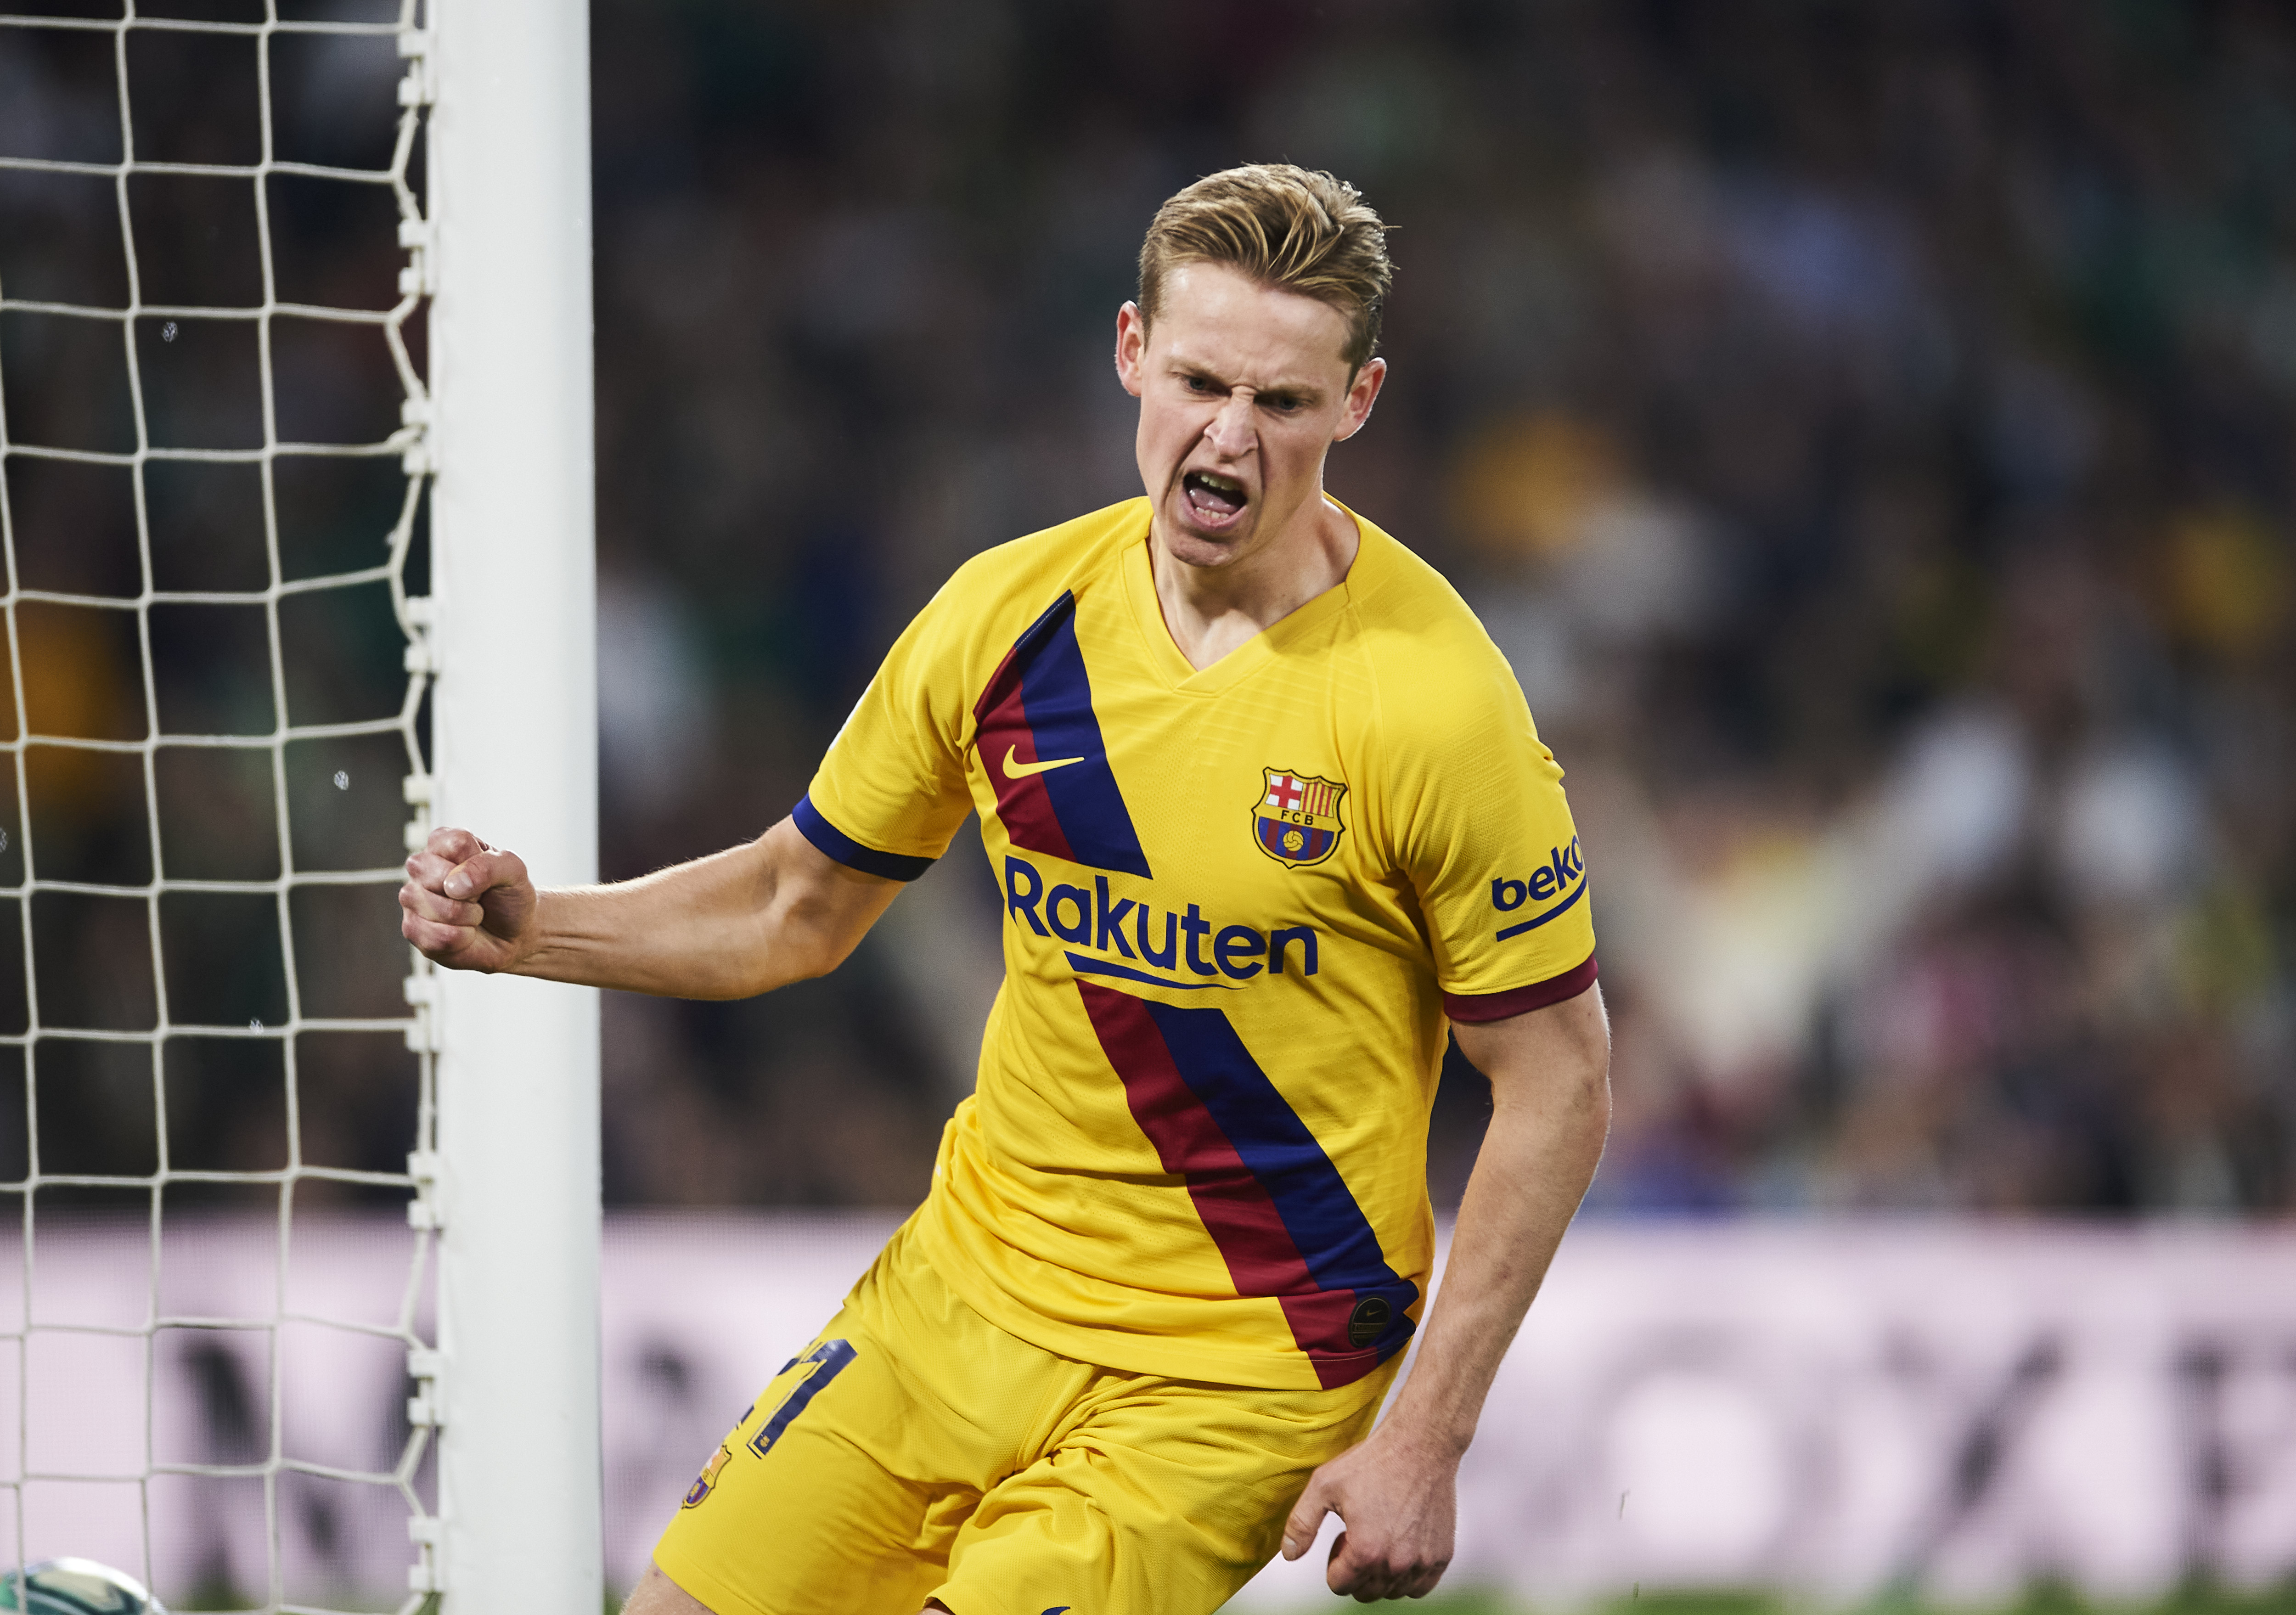 SEVILLE, SPAIN - FEBRUARY 09: Frenkie de Jong of FC Barcelona celebrates after scoring goal during the Liga match between Real Betis Balompie and FC Barcelona at Estadio Benito Villamarin on February 09, 2020 in Seville, Spain. (Photo by Aitor Alcalde/Getty Images)